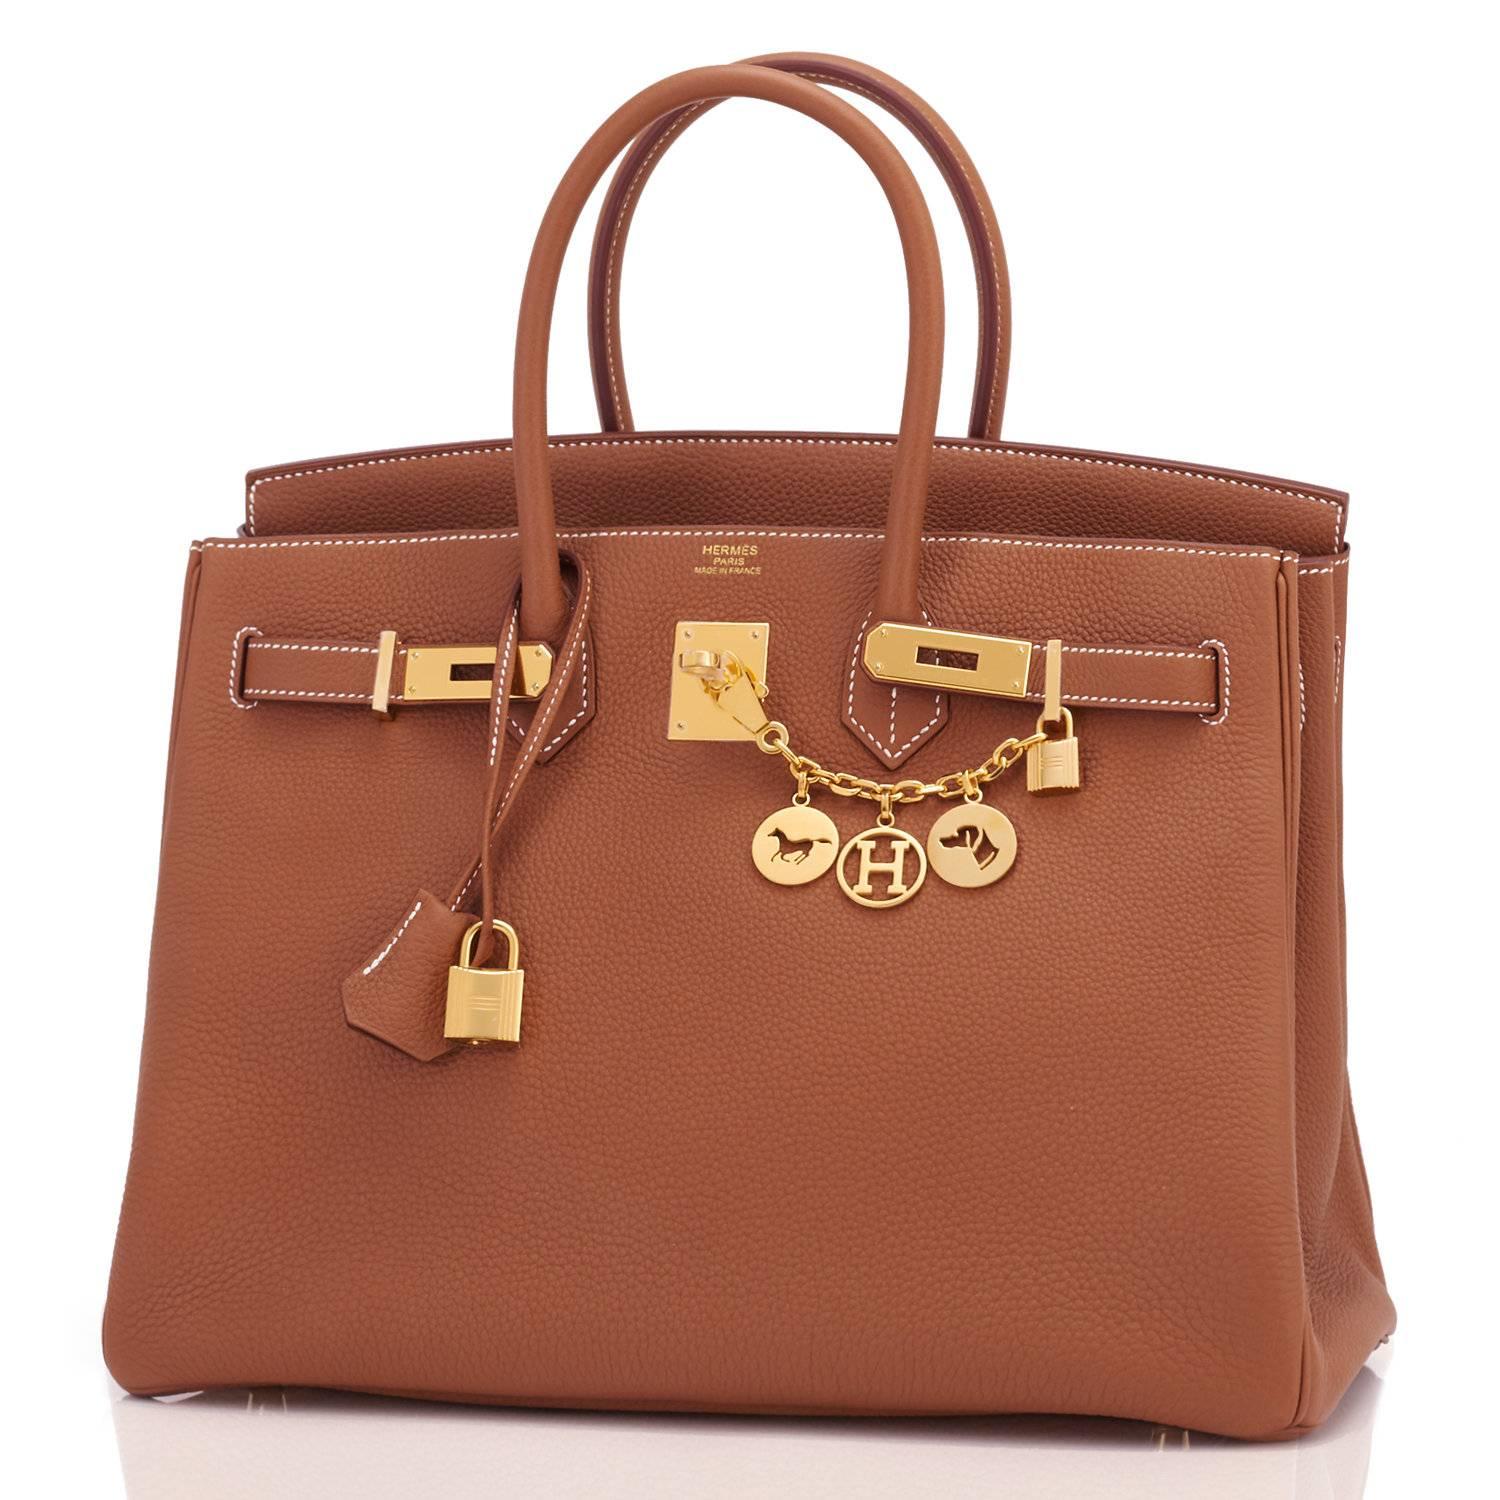 Chicjoy presents Hermes Birkin 35 Gold Togo Tan Gold Hardware Bag 
Brand New in Box. Store Fresh. Pristine Condition (with plastic on hardware). 
Perfect gift! Comes with lock, keys, clochette, sleeper, raincoat, and Hermes box.
Gold is a gorgeous